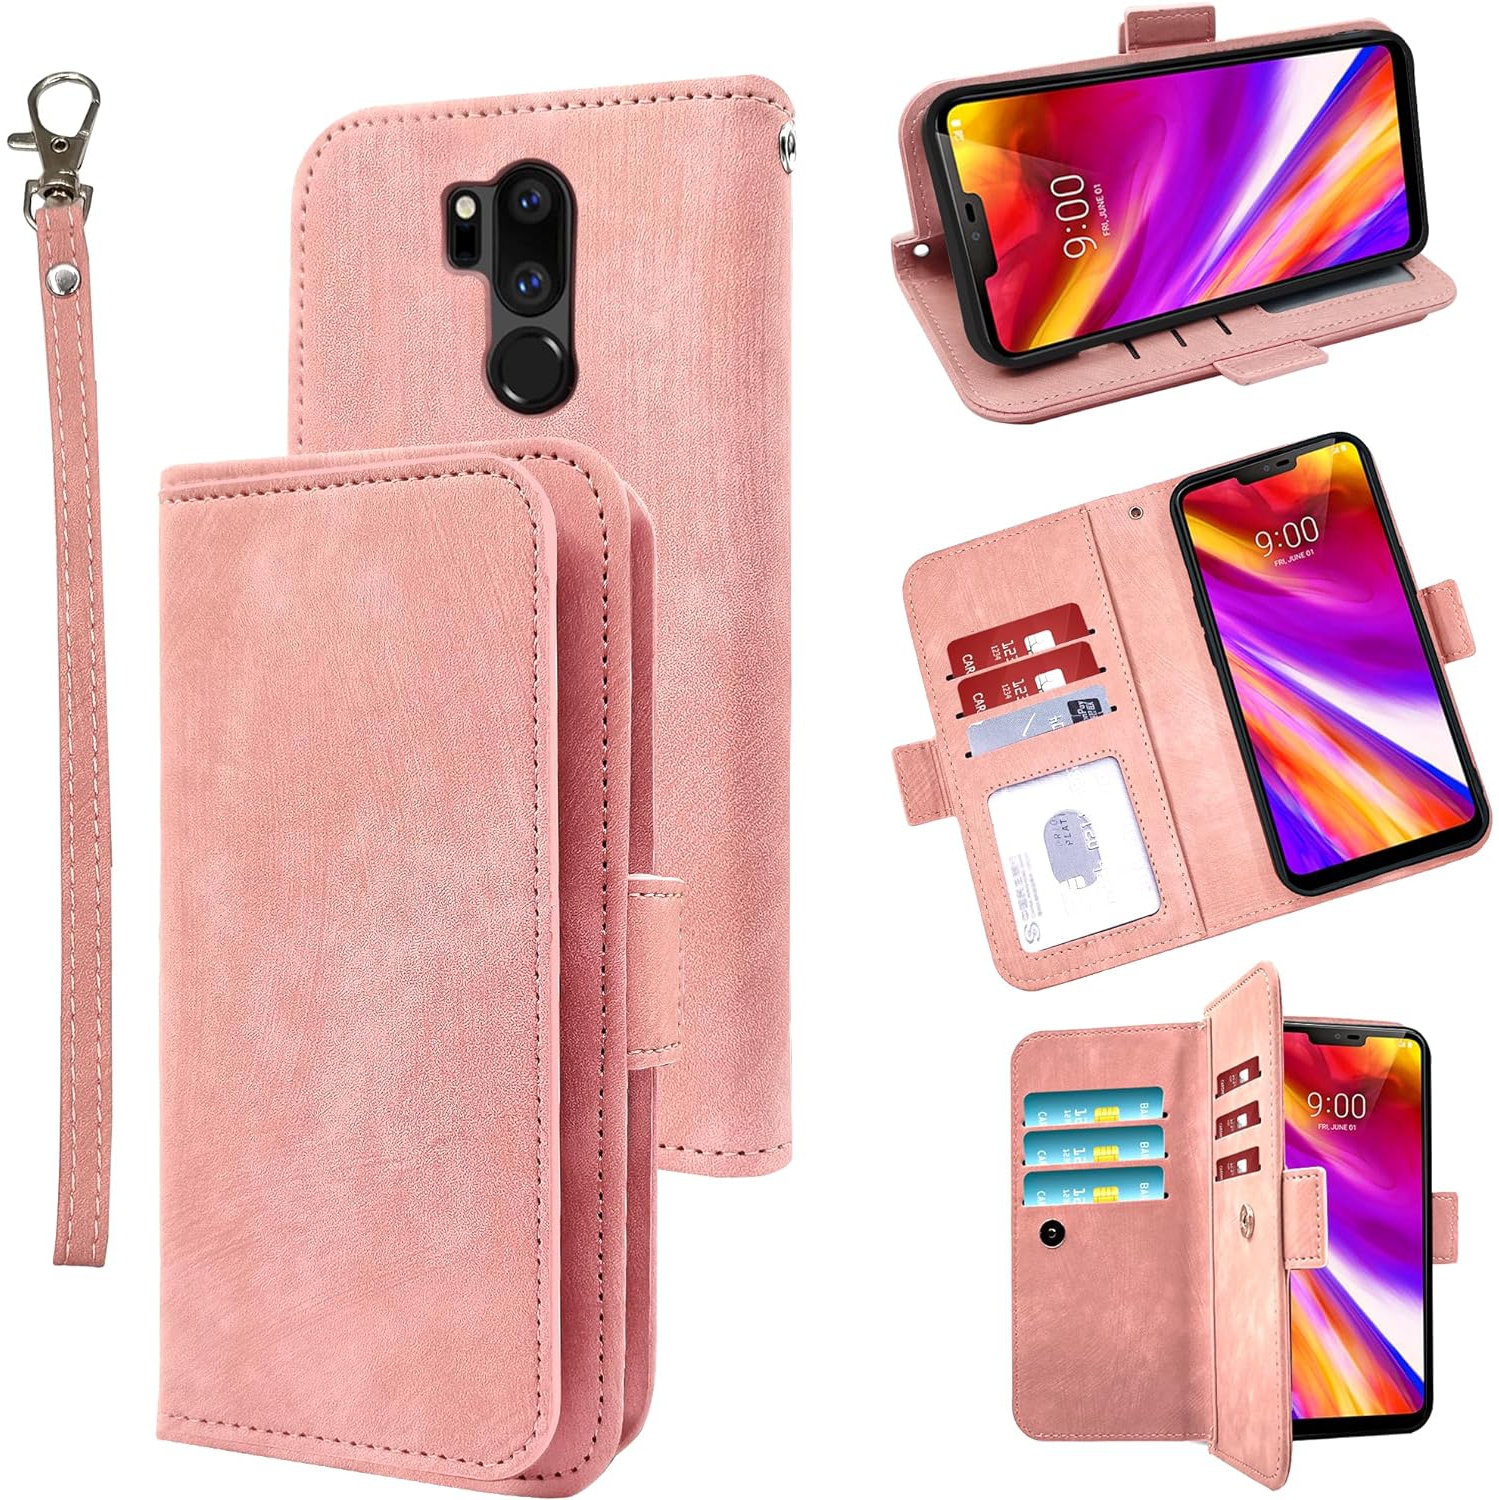 Compatible with LG G7 ThinQ Wallet Case Wrist Strap Lanyard Leather Flip Card Holder Stand Cell Phone Cover